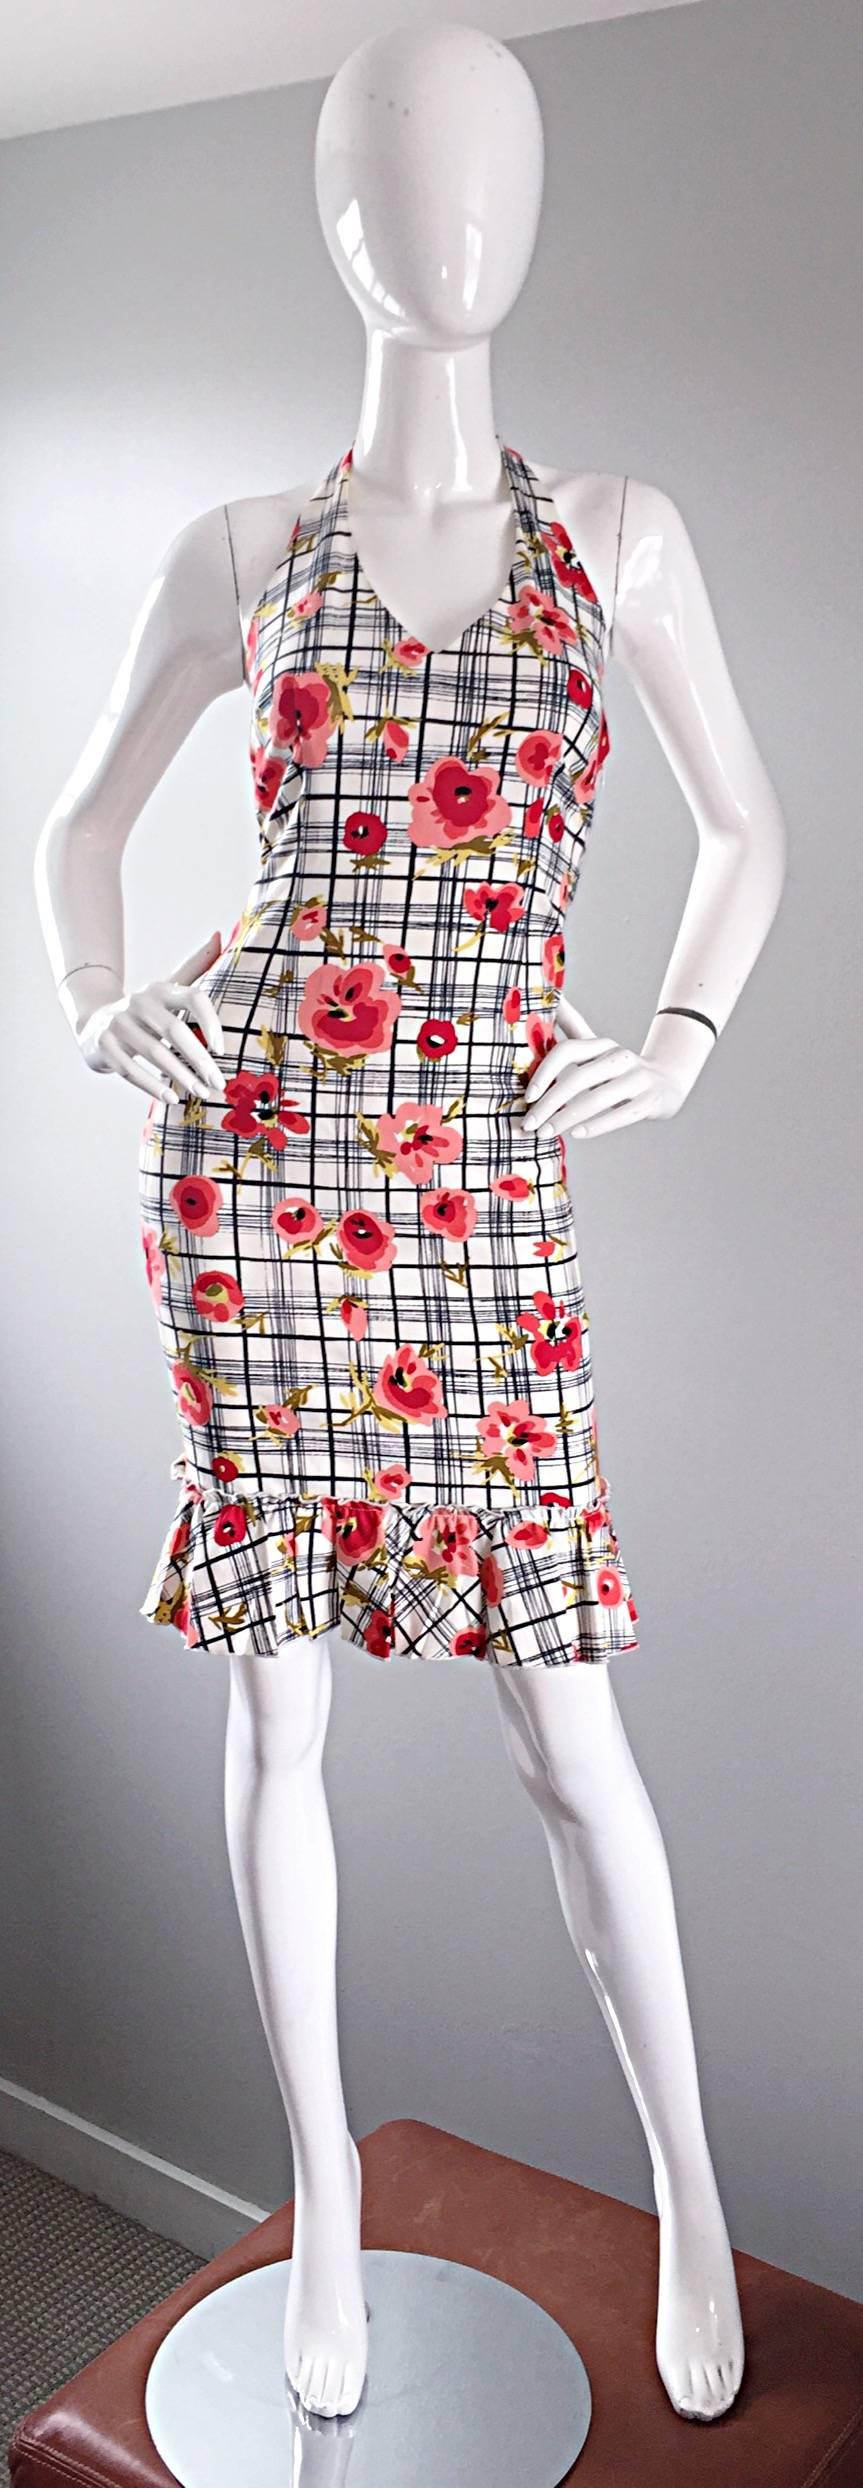 Vintage Moschino Cheap & Chic Size 4 1990s 3 D Plaid Flowers 90s Bodycon Dress  For Sale 1